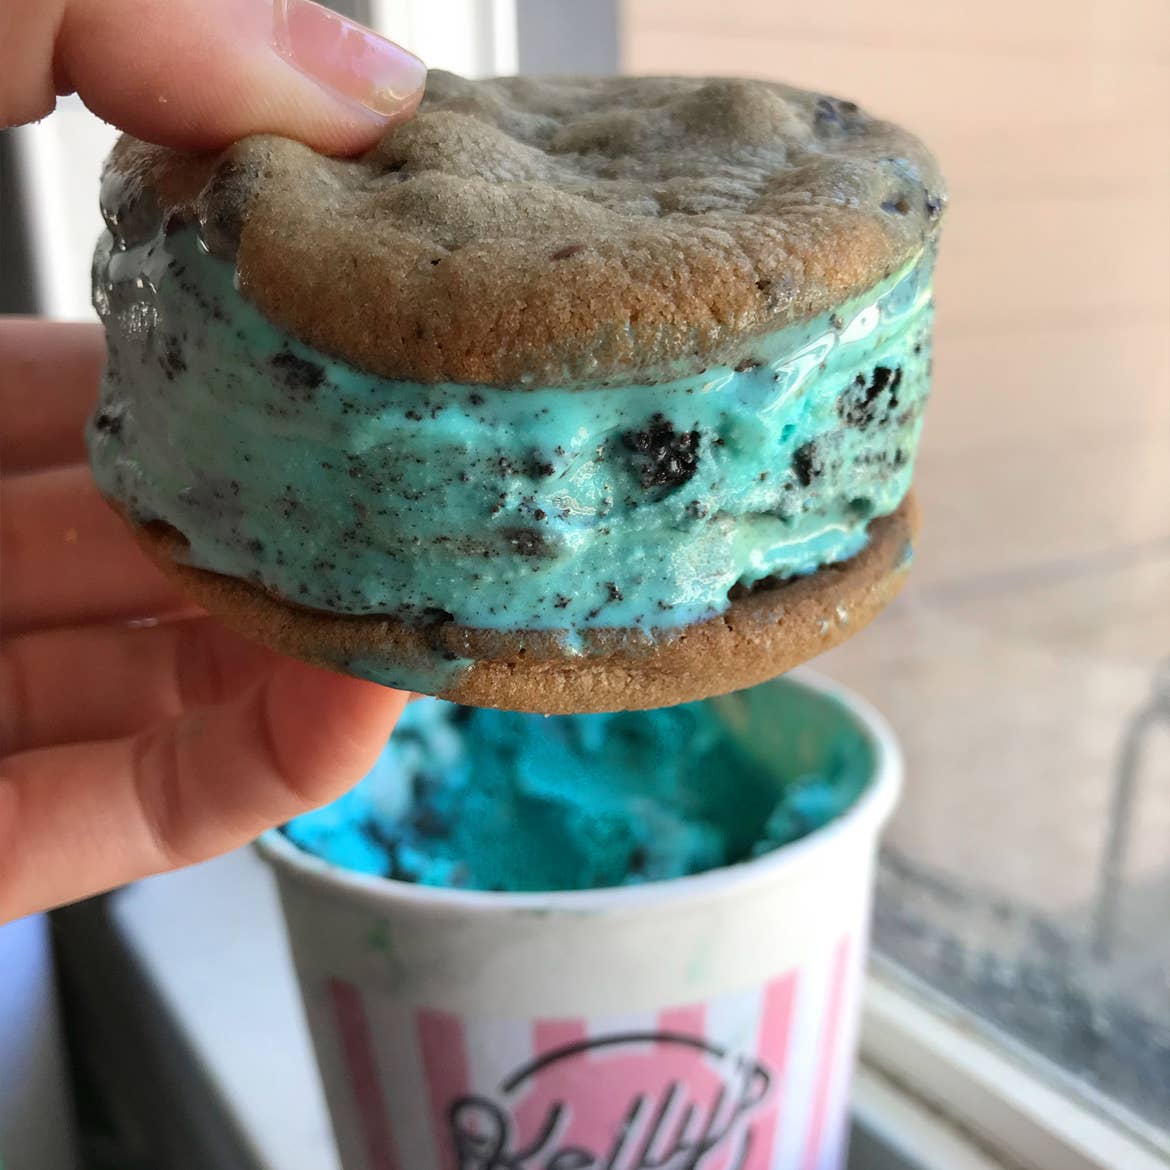 A woman holds a blue ice cream, chocolate chip cookie sandwich over a pint of ice cream.